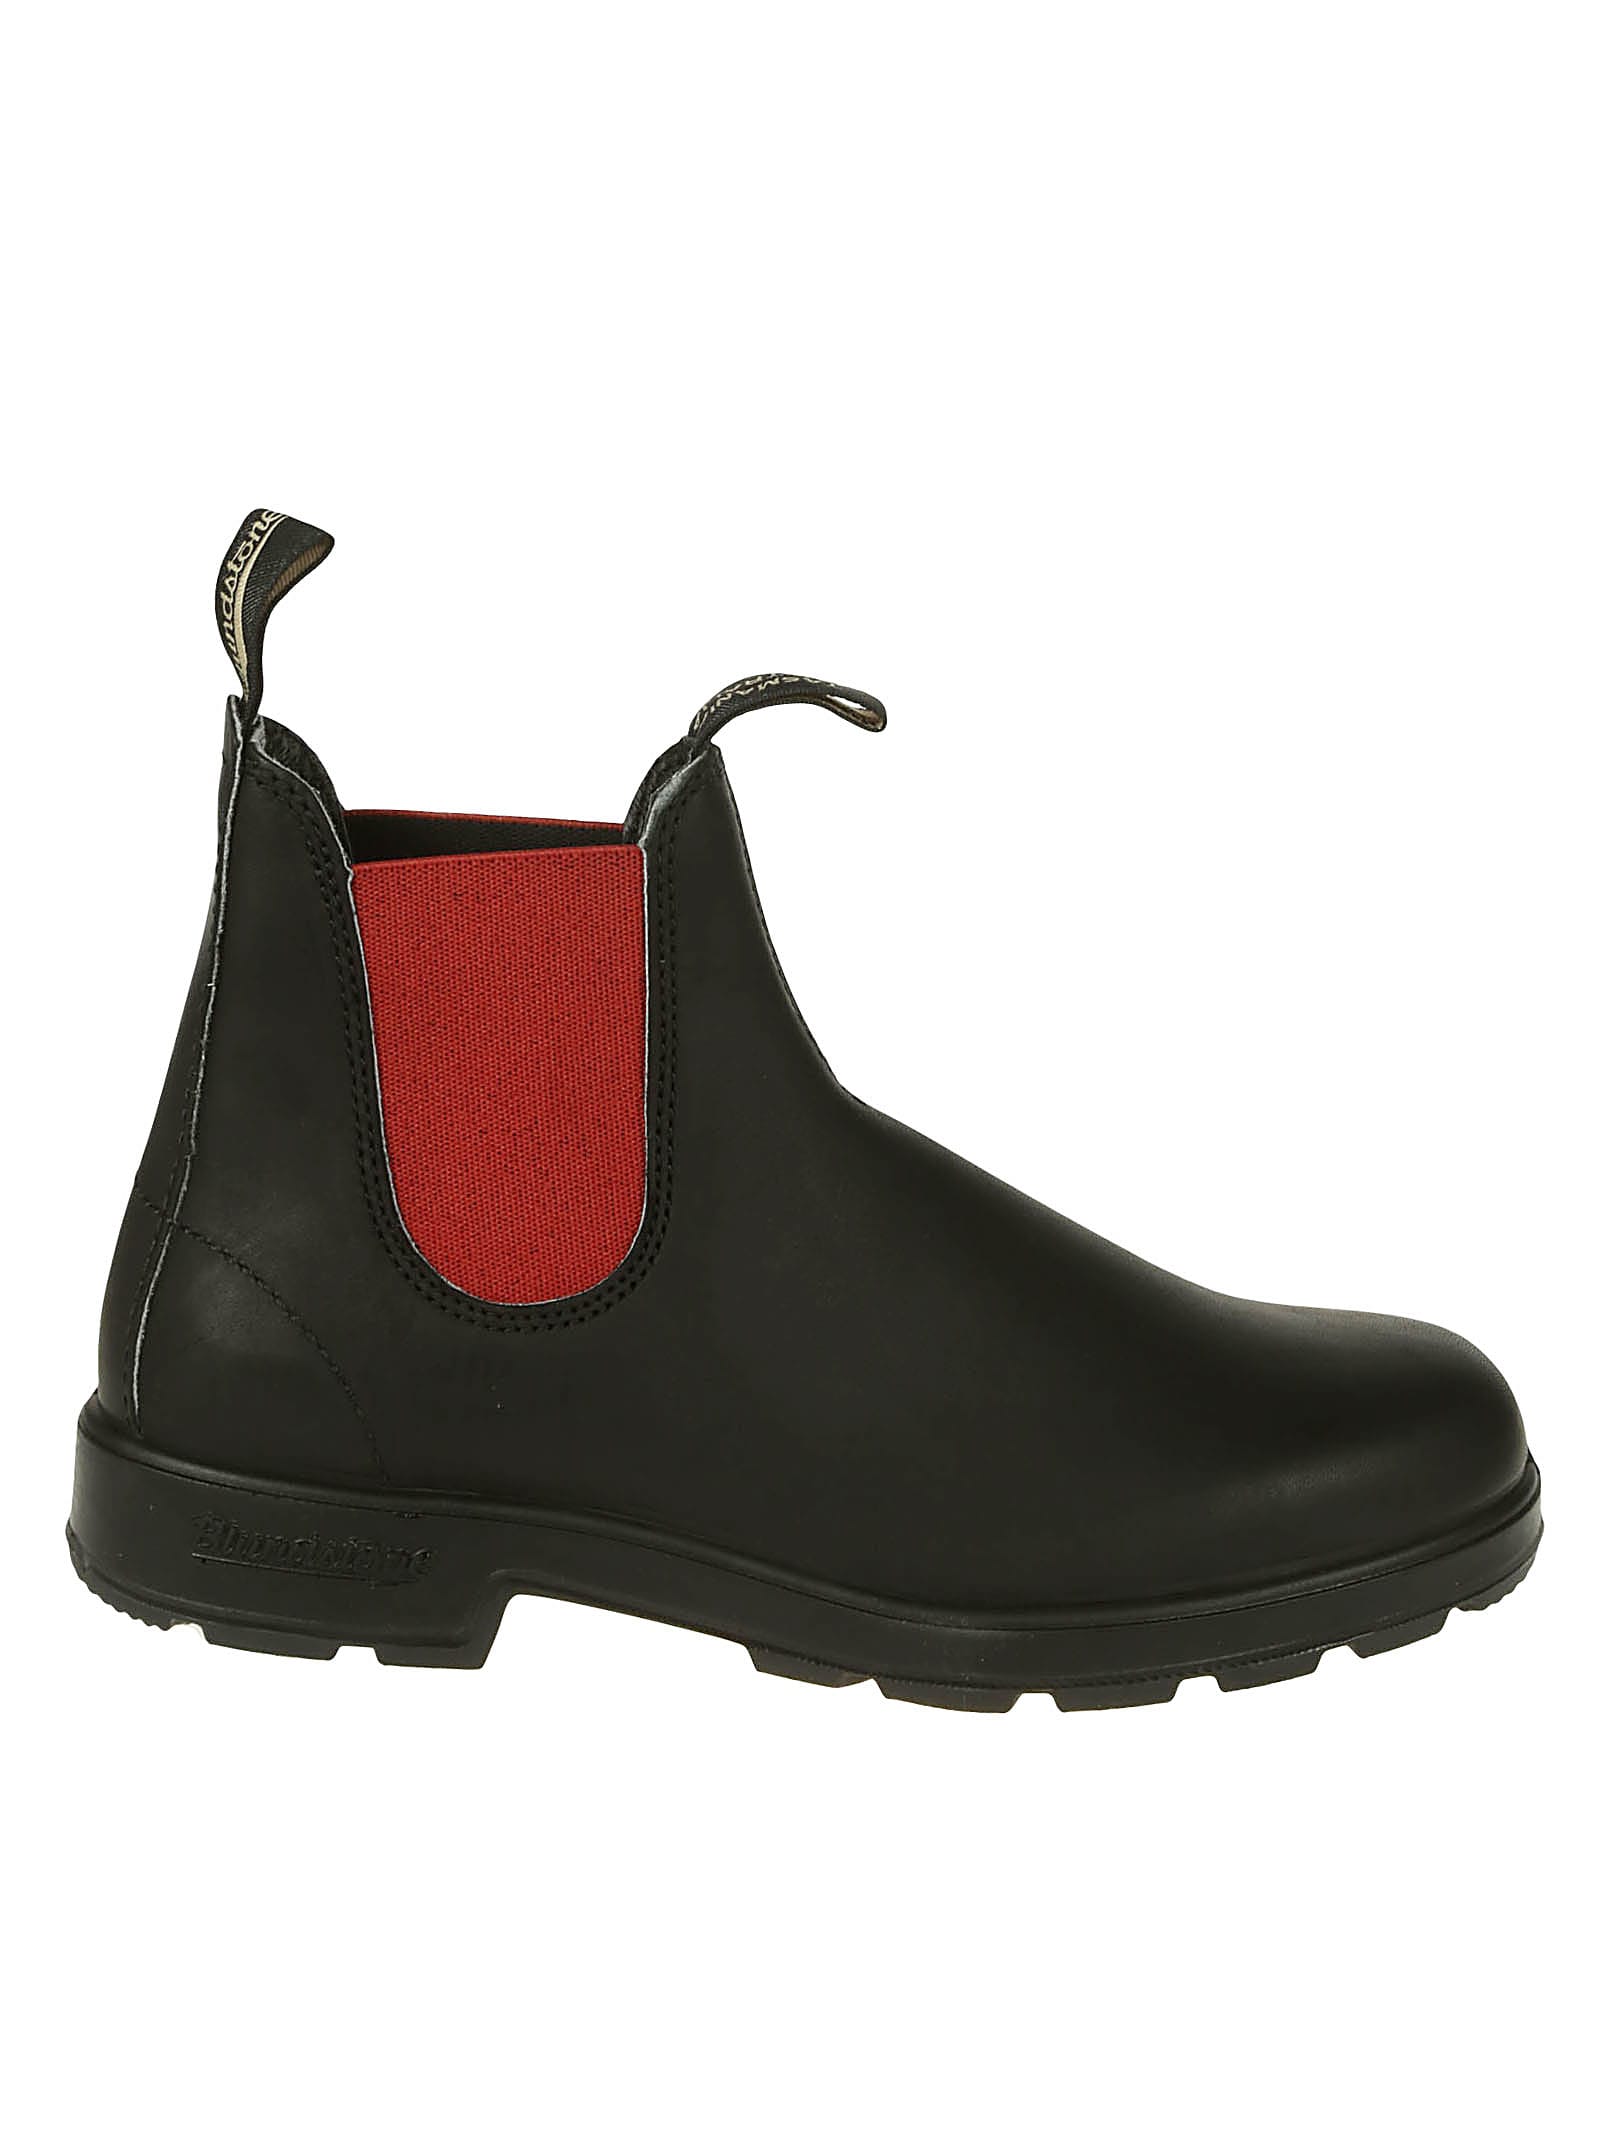 Blundstone Colored Elastic Sided Boots